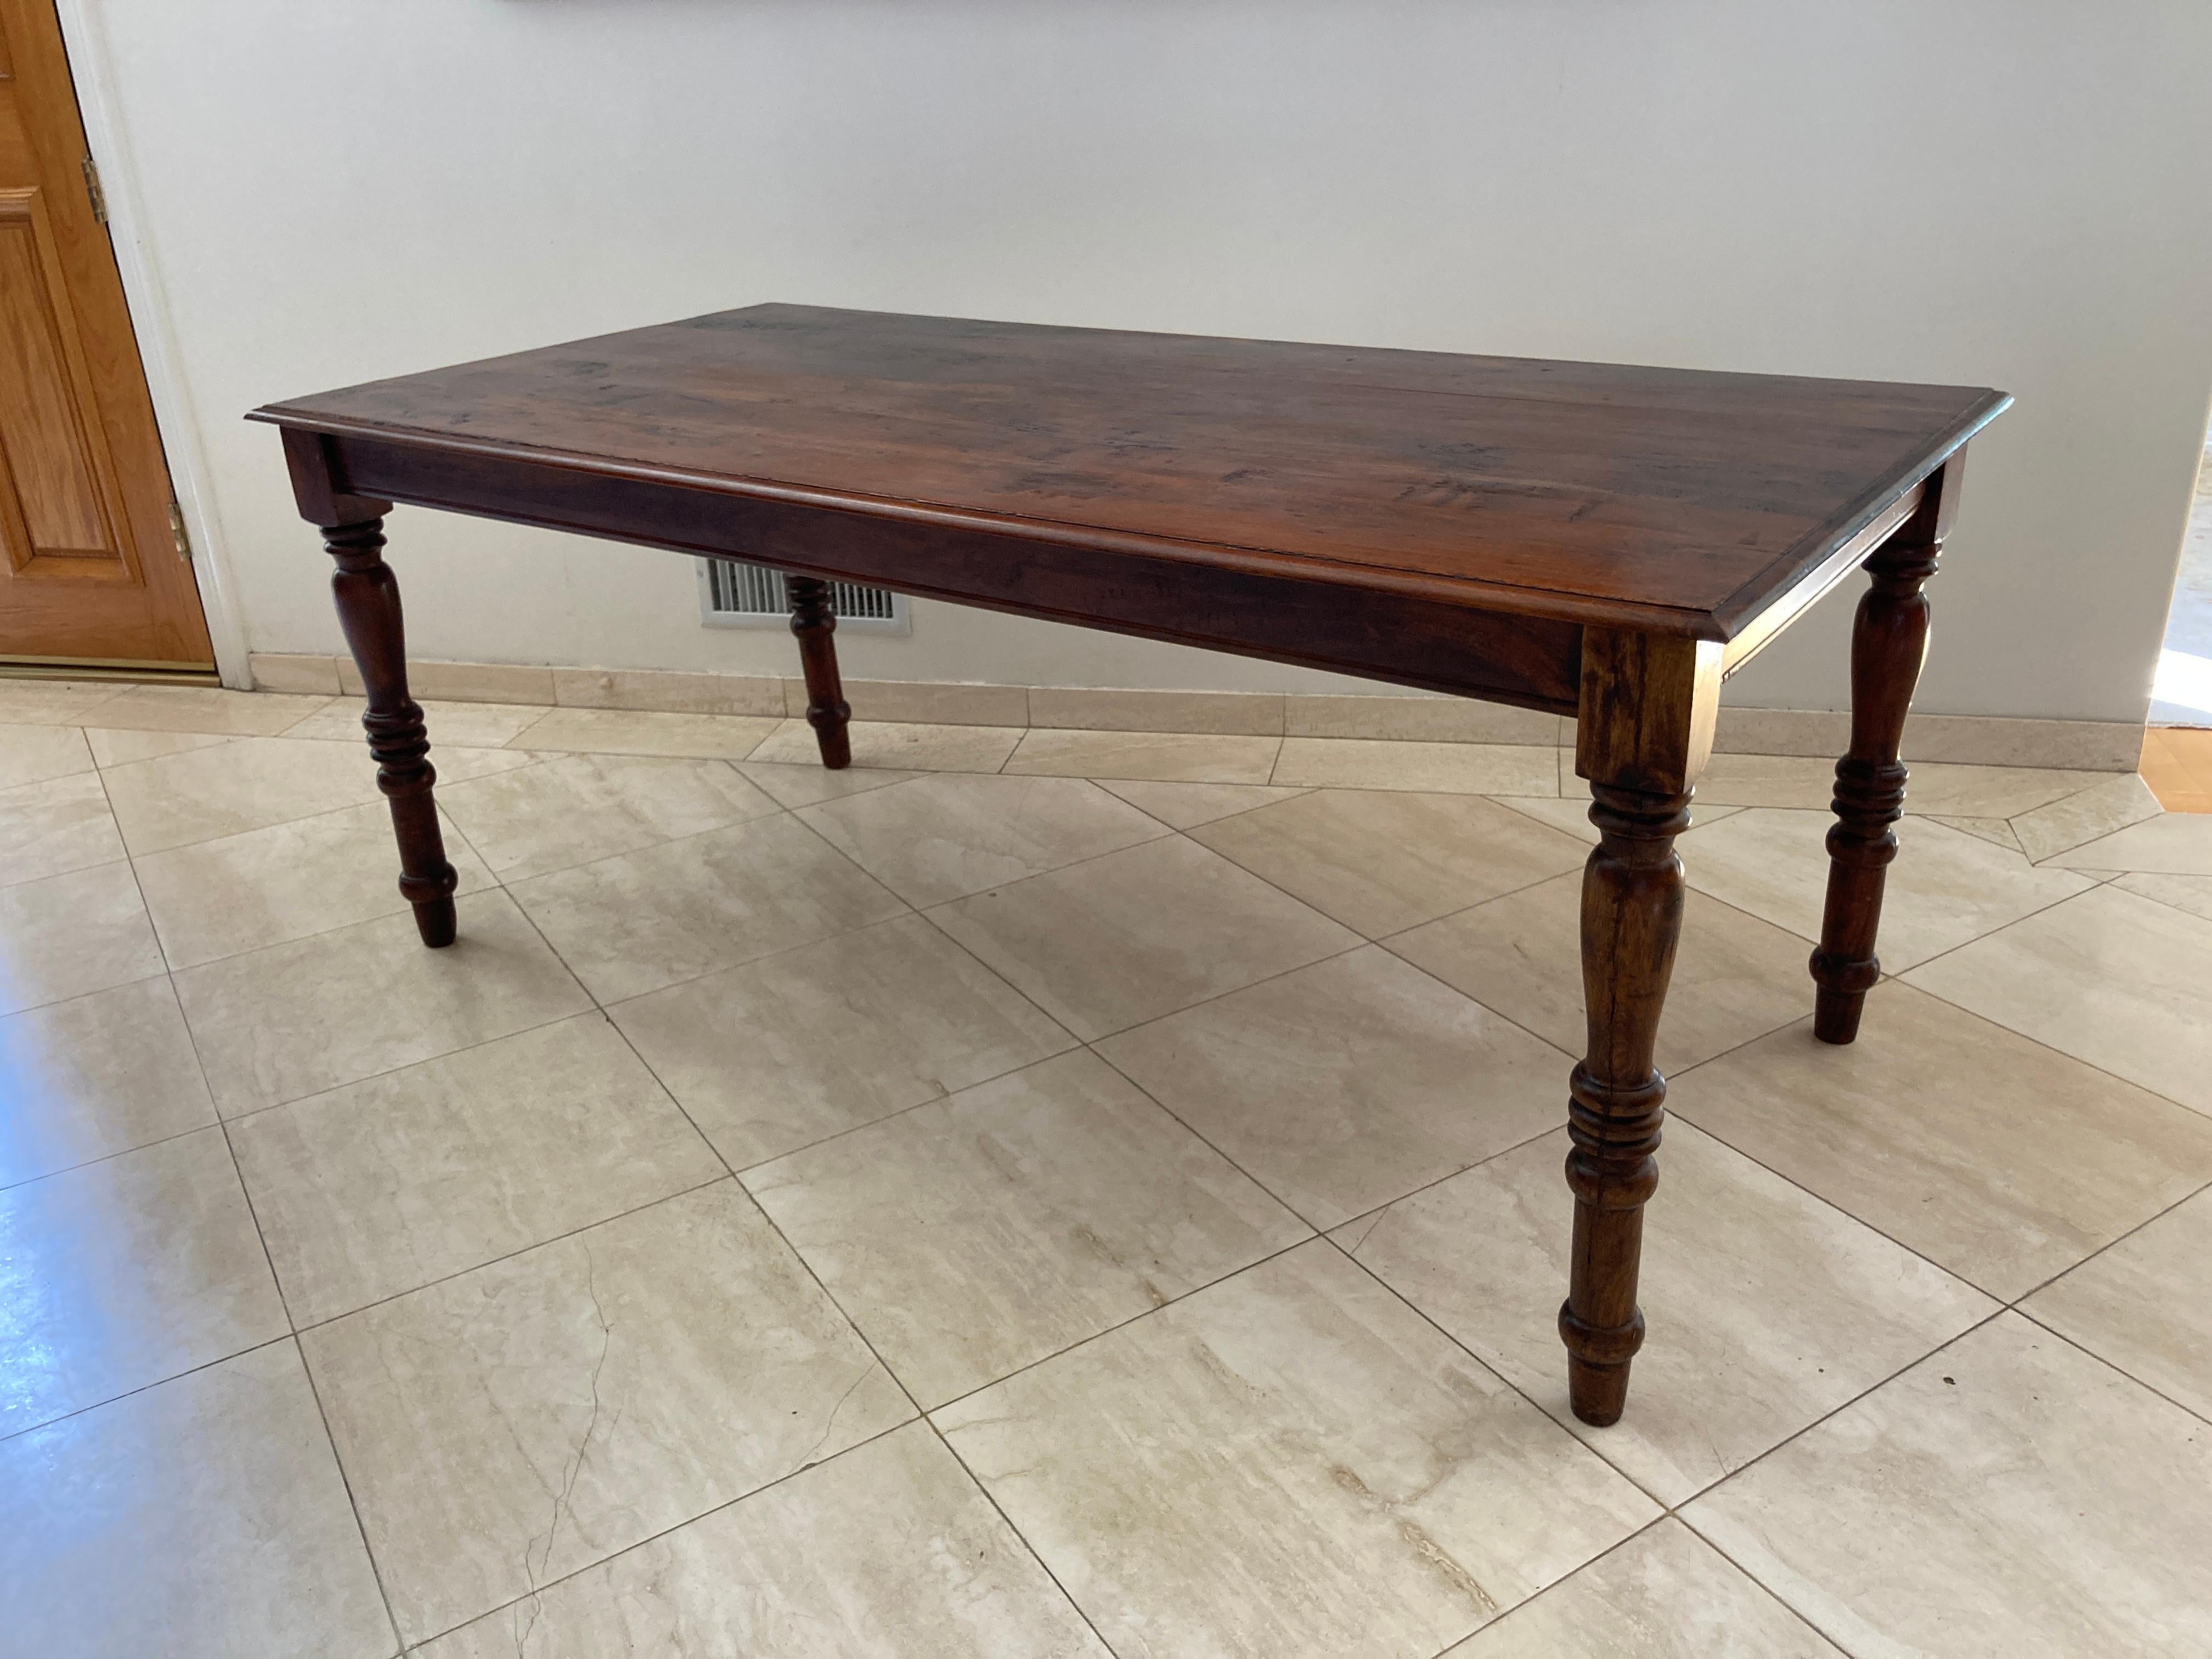 Rectangular French country rustic Provincial style dining table with distressed planked antiqued distressed stained wood top supported by turned legs ending with peg feet.
Classic European rustic stained farmhouse refectory dining table or dining